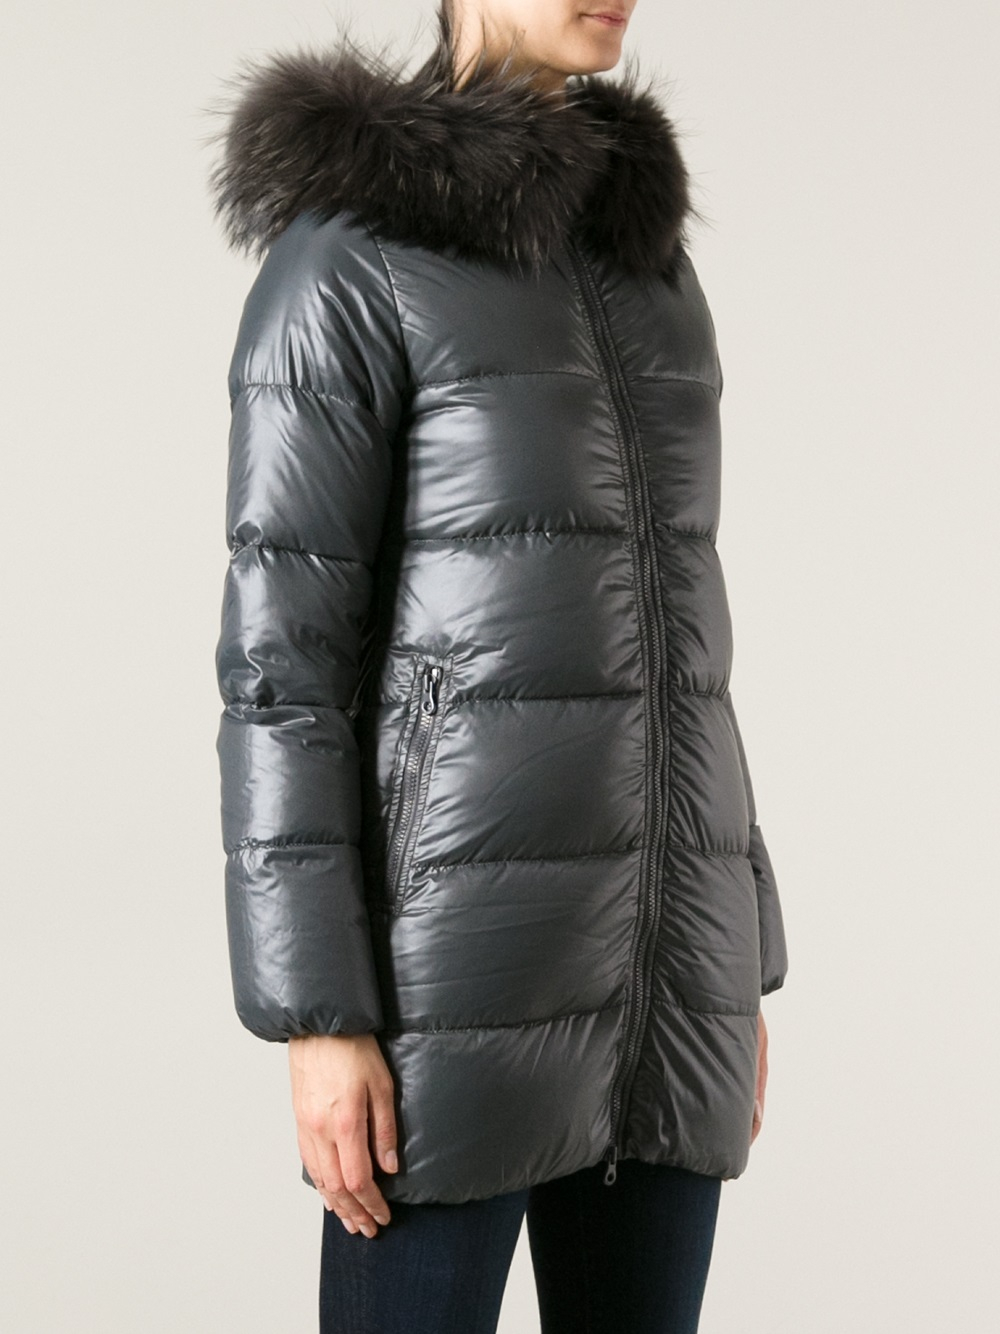 Lyst - Duvetica Padded Jacket in Gray